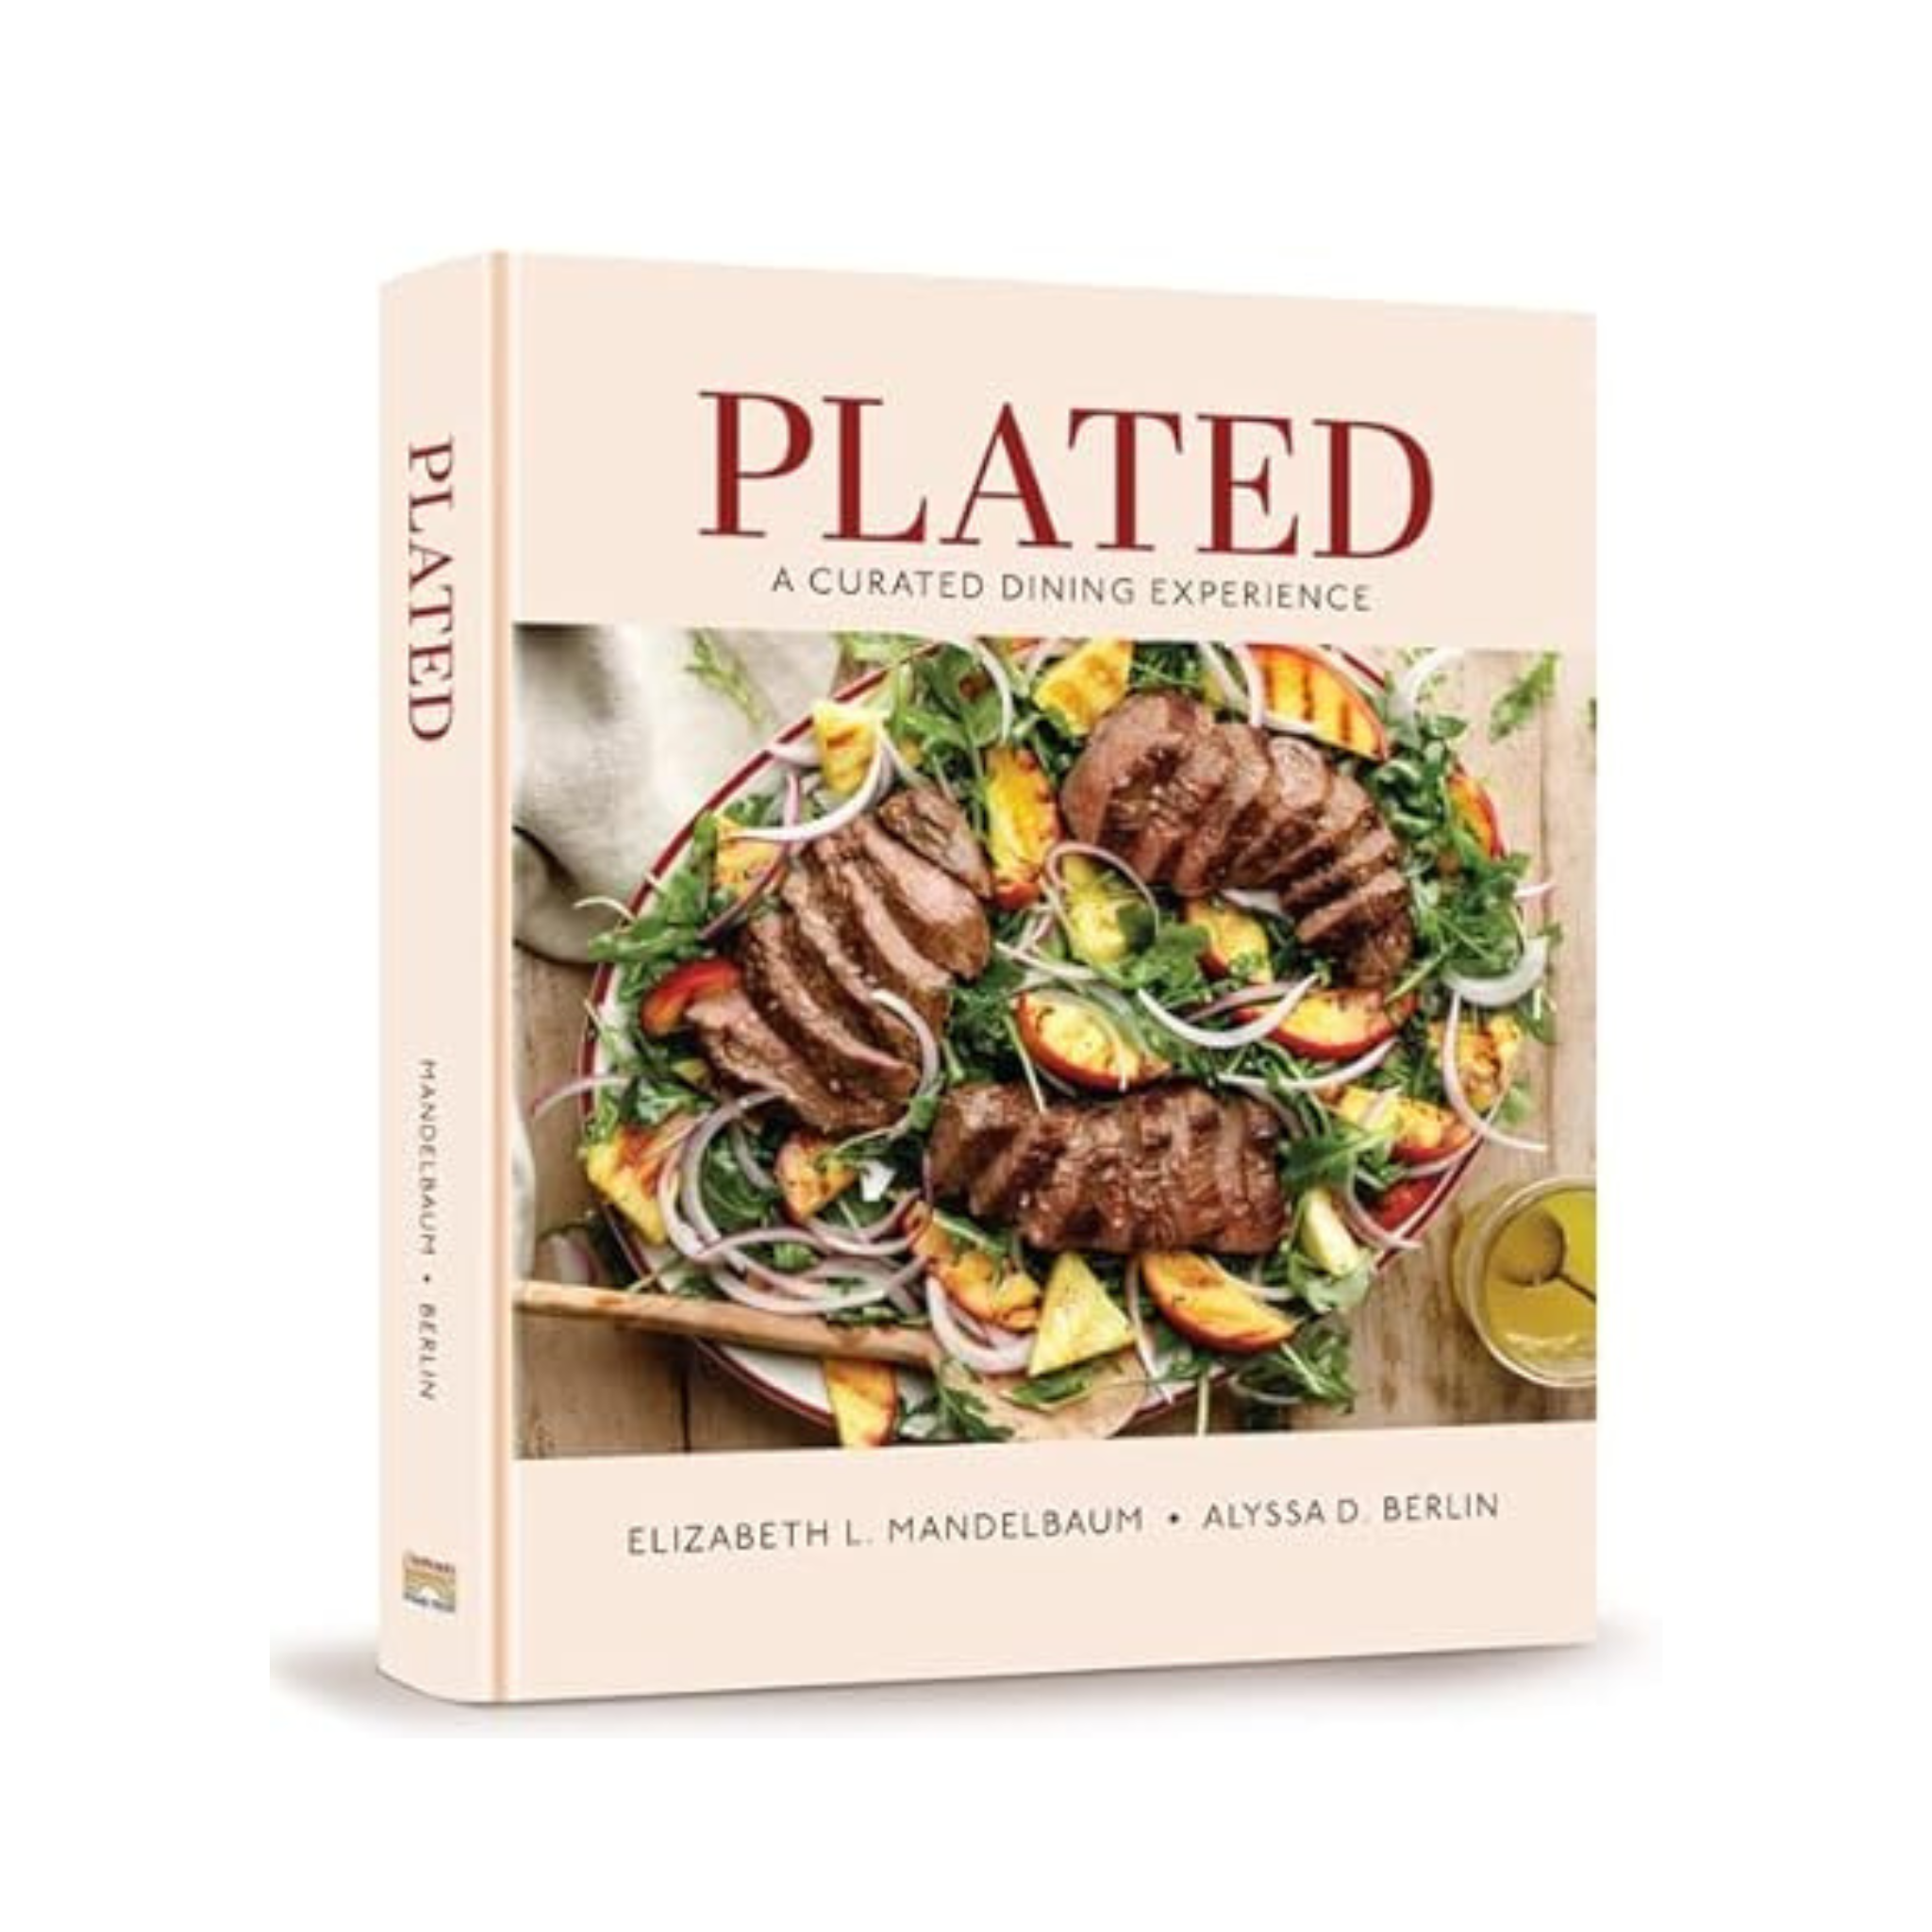 Plated: A Curated Dining Experience Hardcover Cookbook